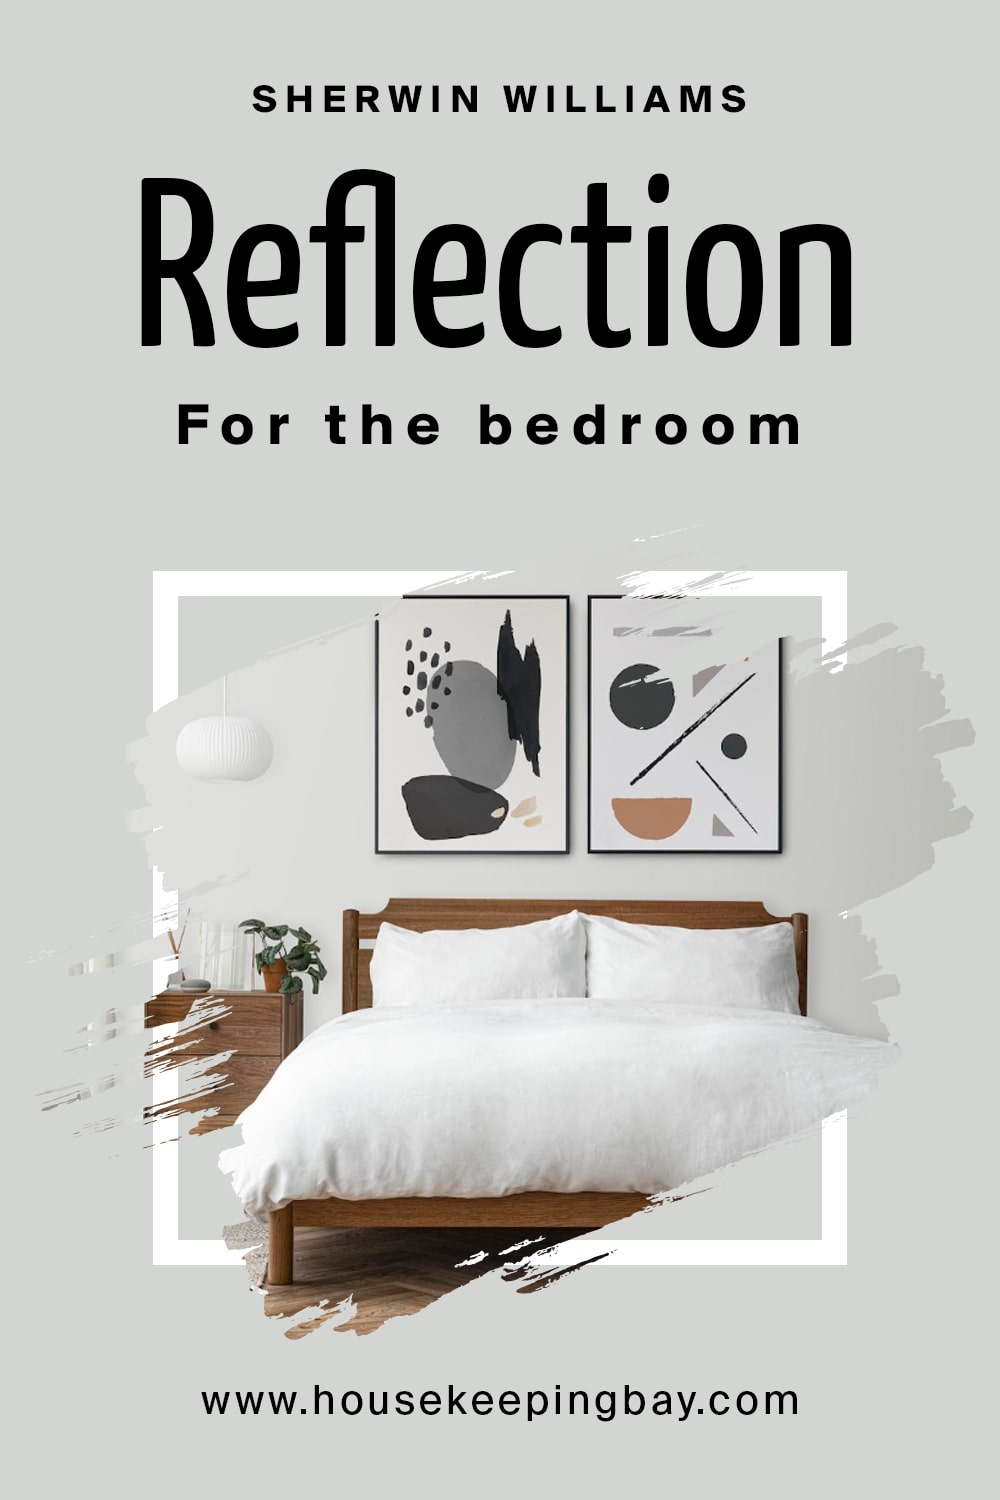 Sherwin Williams. Reflection For the bedroom